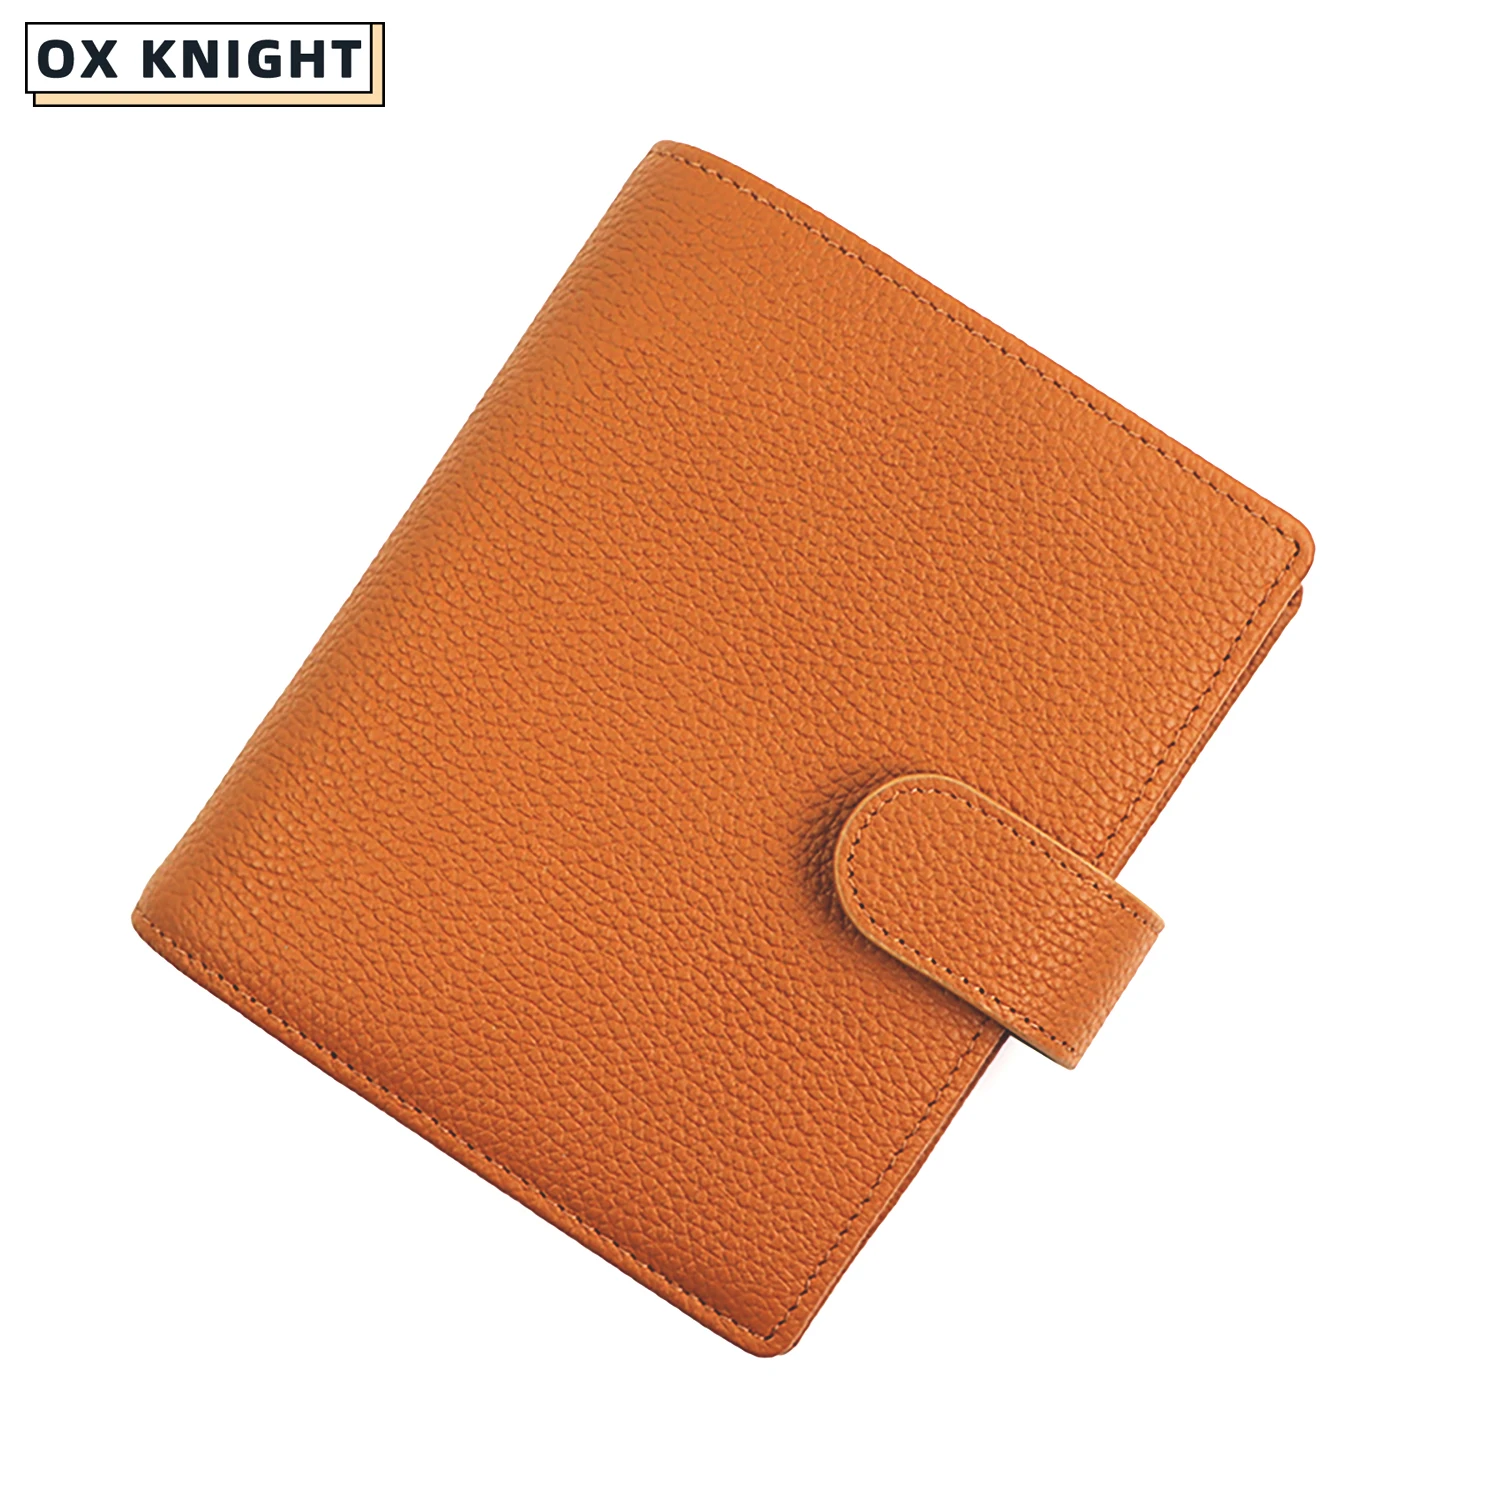 OX KNIGHT [Free Shipping] Limited Lmperfect A7 Ring Planner Two-Color Pebbled Style Multifunctional Agenda Organizer Notebook